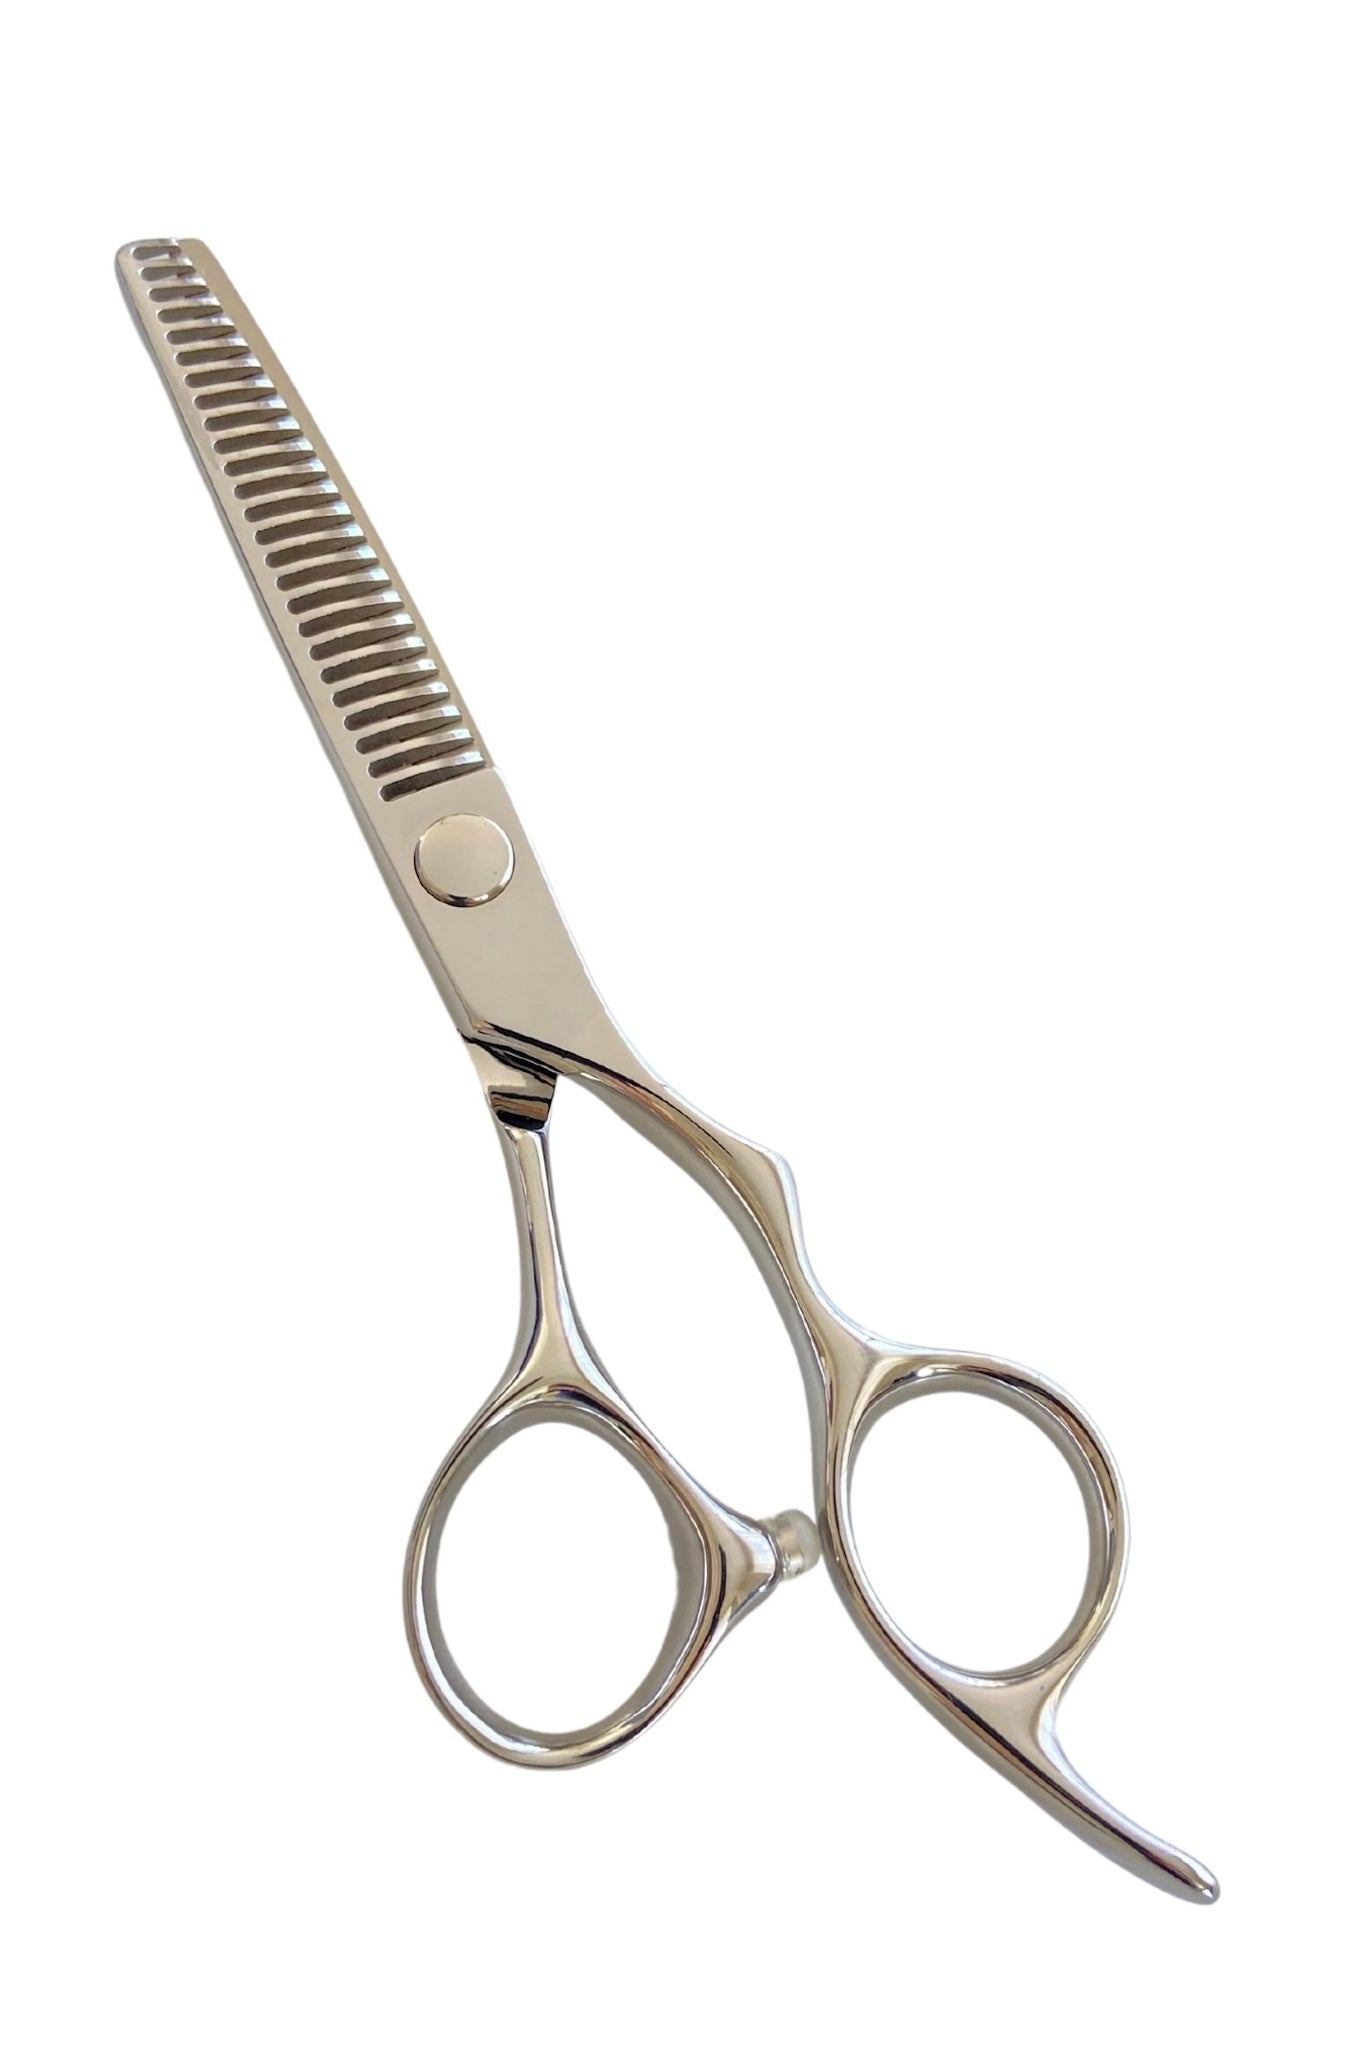 iCandy ELECTRO Silver VG10 Thinning Scissor (5.5 inch)